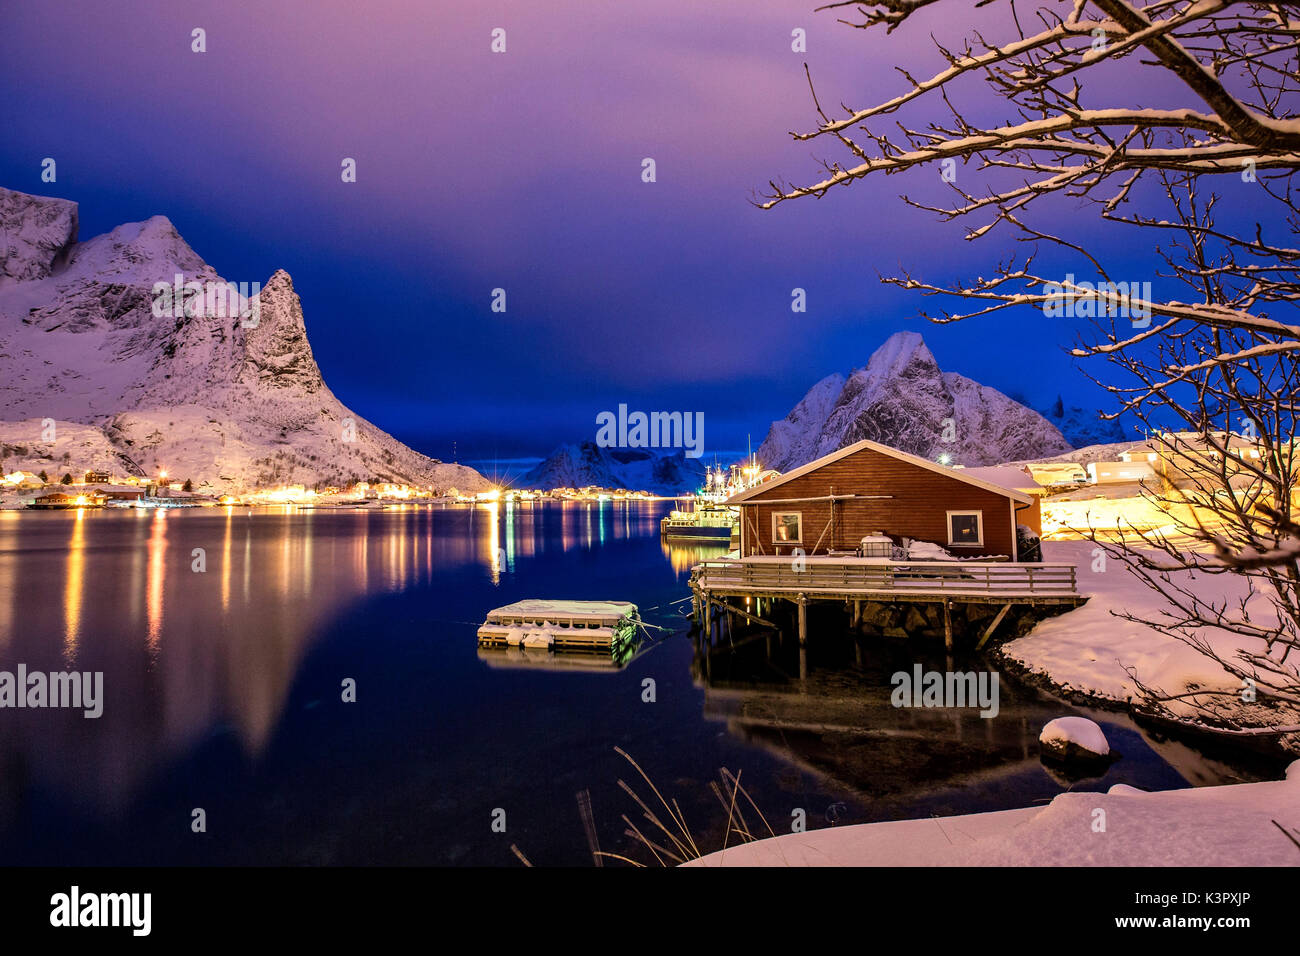 A rorbu, the typical Norwegian fishermen house, reflecting in the still water of the sea at the blue hour in Reine, Lofoten islands, Norway. Europe Stock Photo